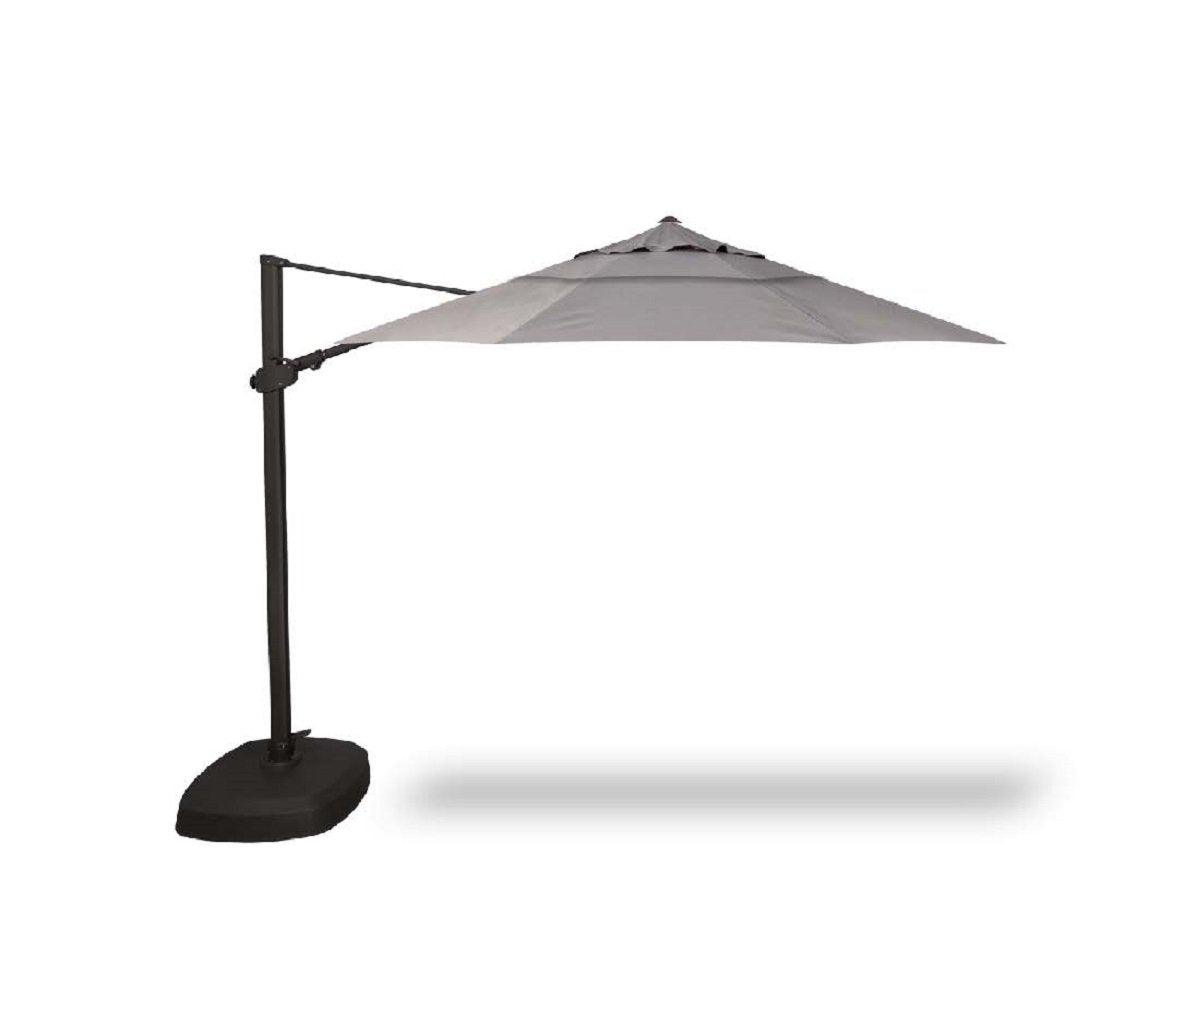 With an array of solid classic colours to choose from, the Cantilever Octagonal Umbrella is a stunning and stable investment for your outdoor living. Rest in shade with an adjustable arm and double fabric laying that stretches 11.5 feet. 